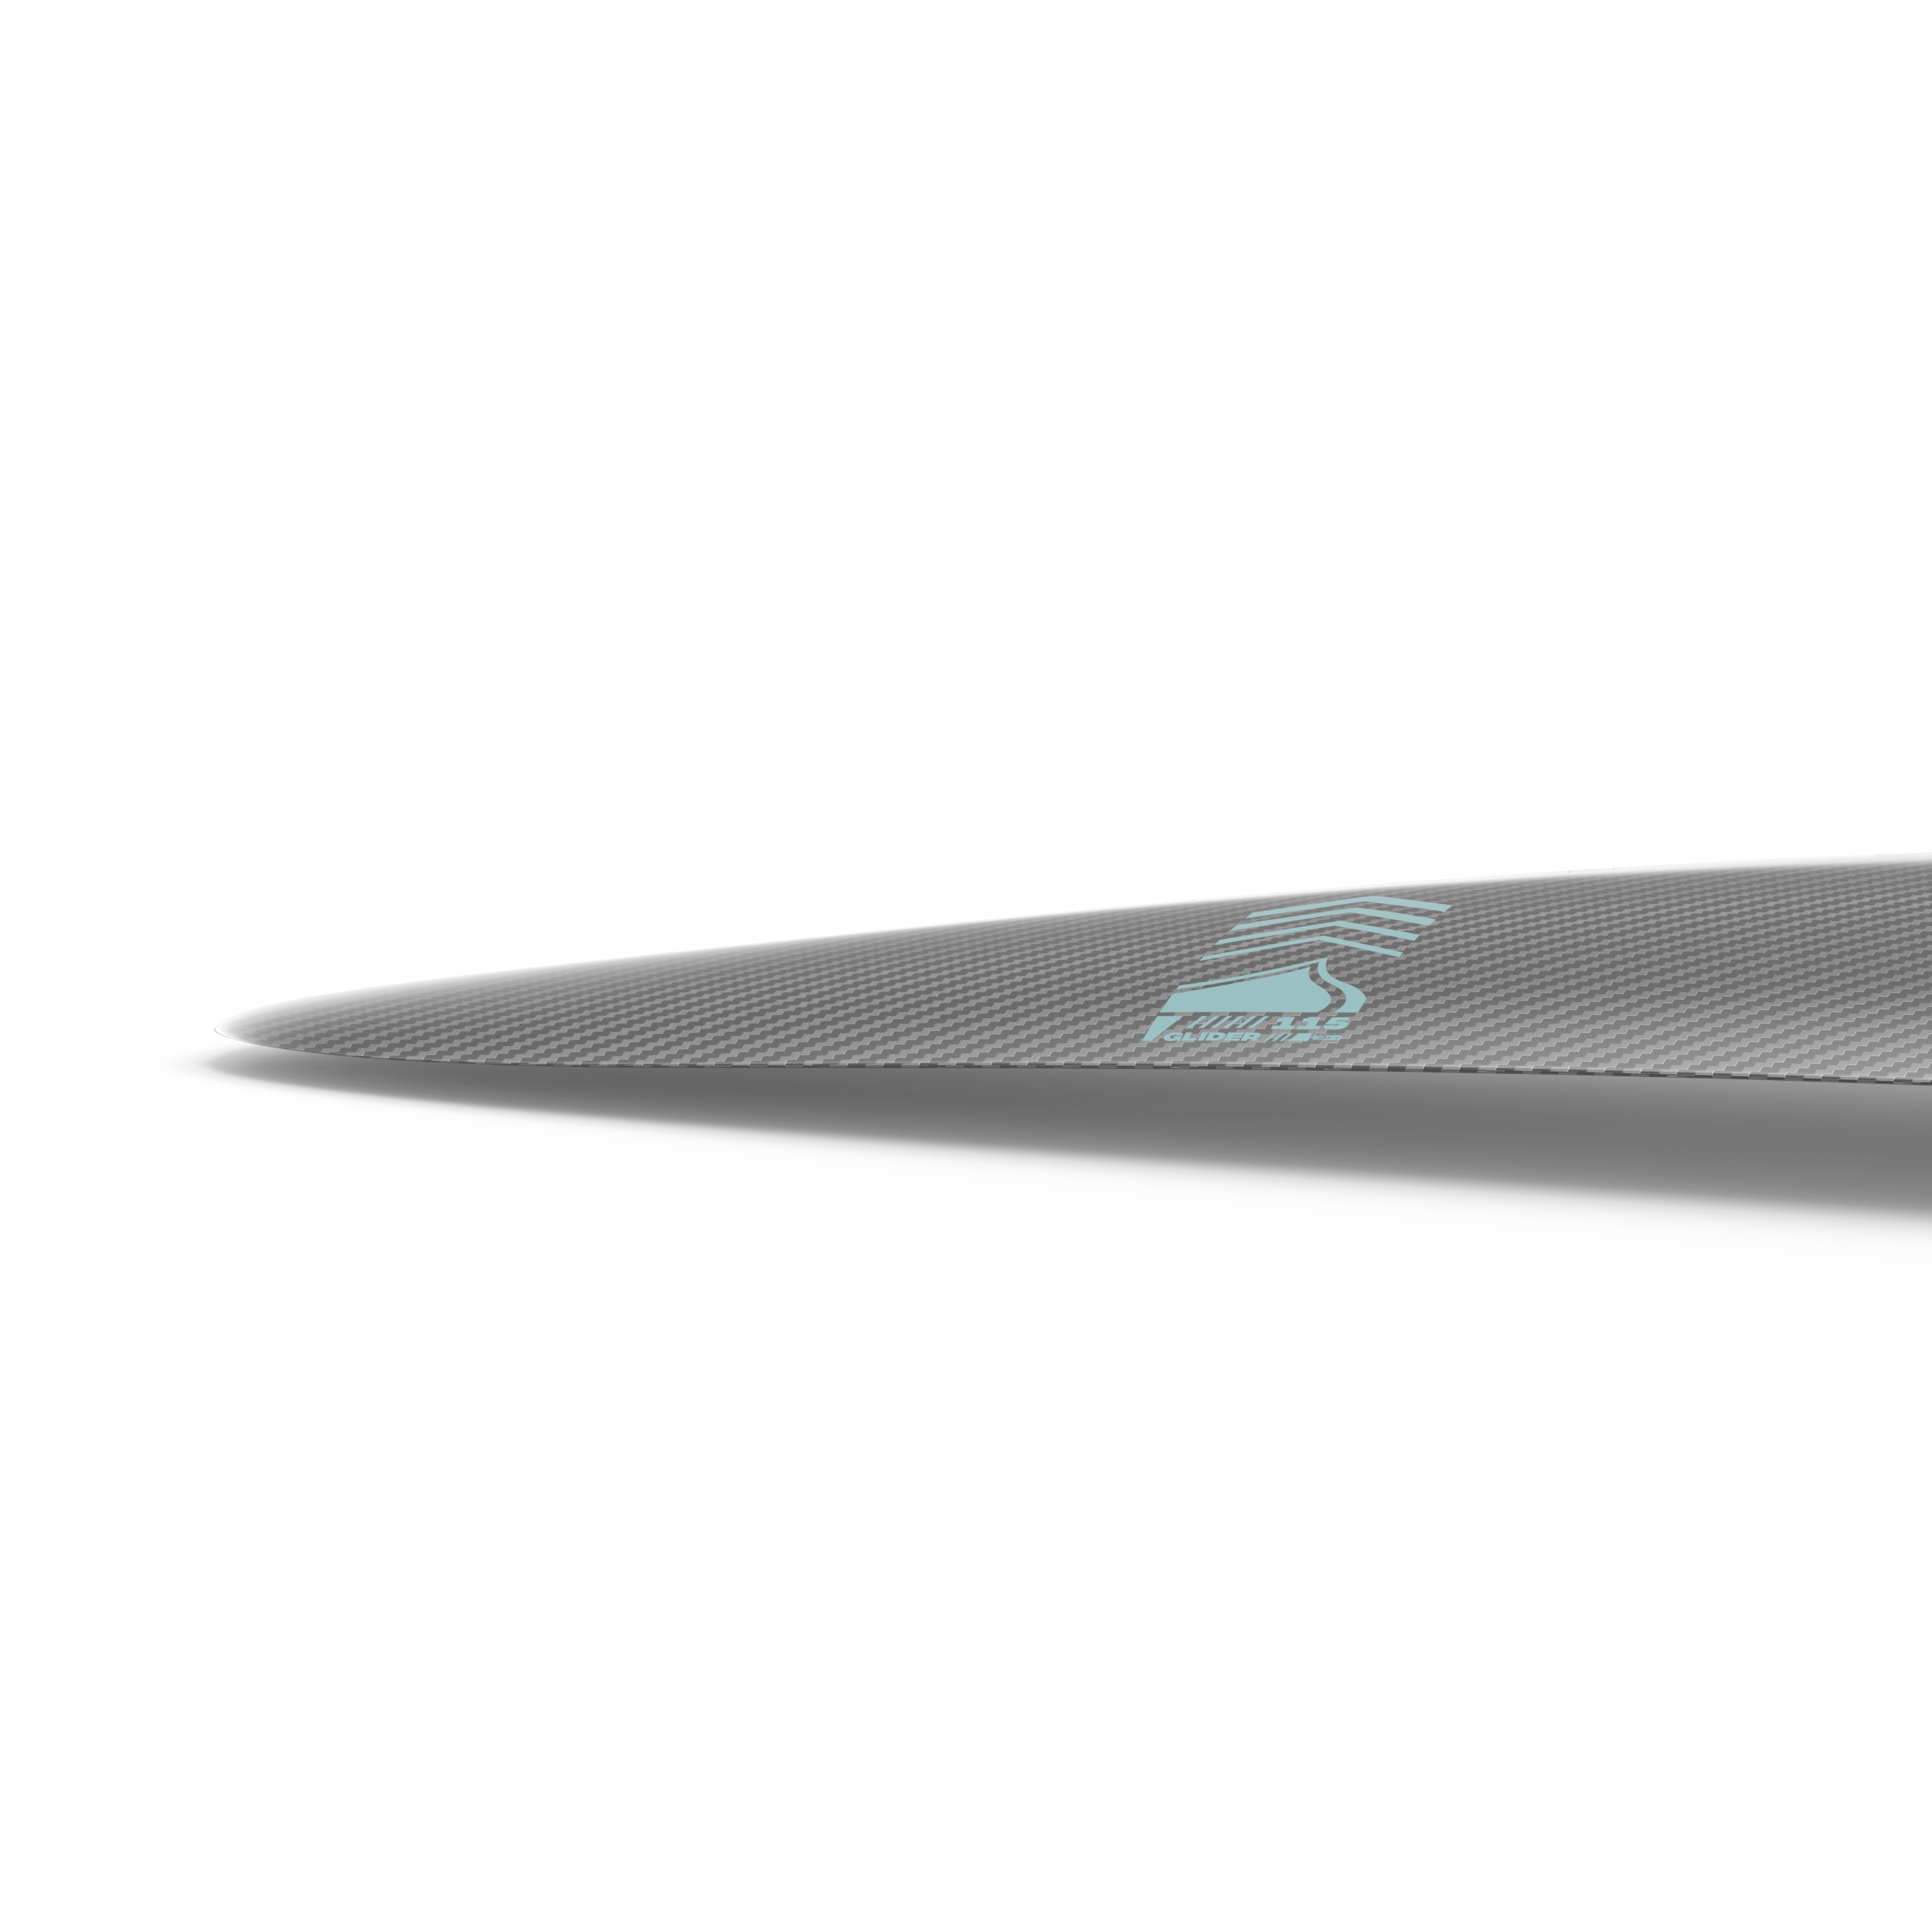 A close up of a Liquid Force 2024 Glider H.A. 115 Front Wing on a white surface, highlighting its sleek design and lightweight construction.